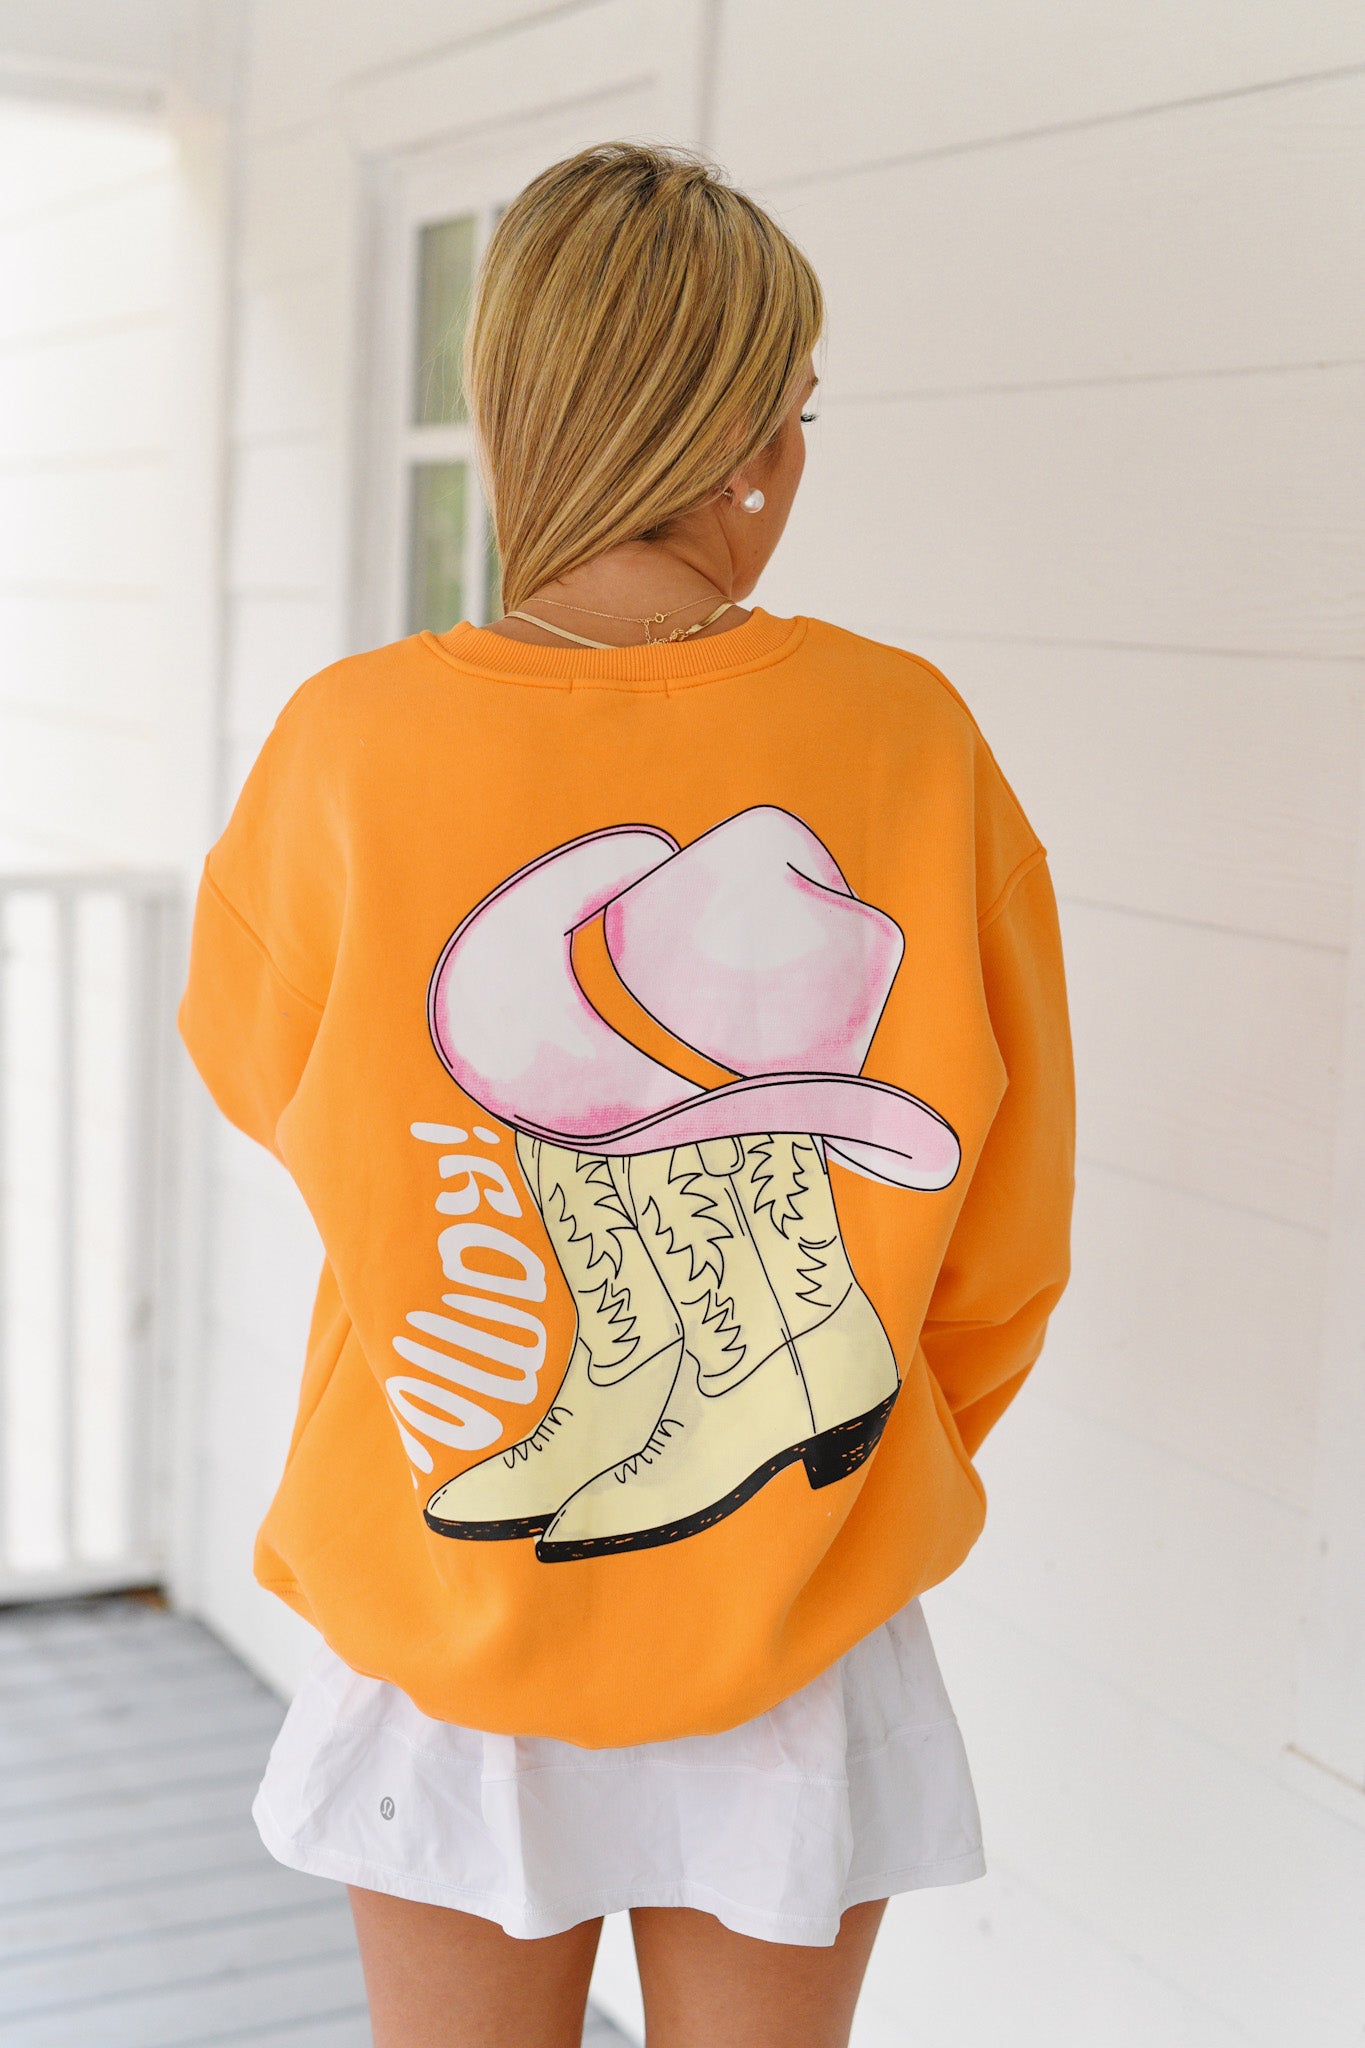 Howdy Pullover Top - Orange/Pink